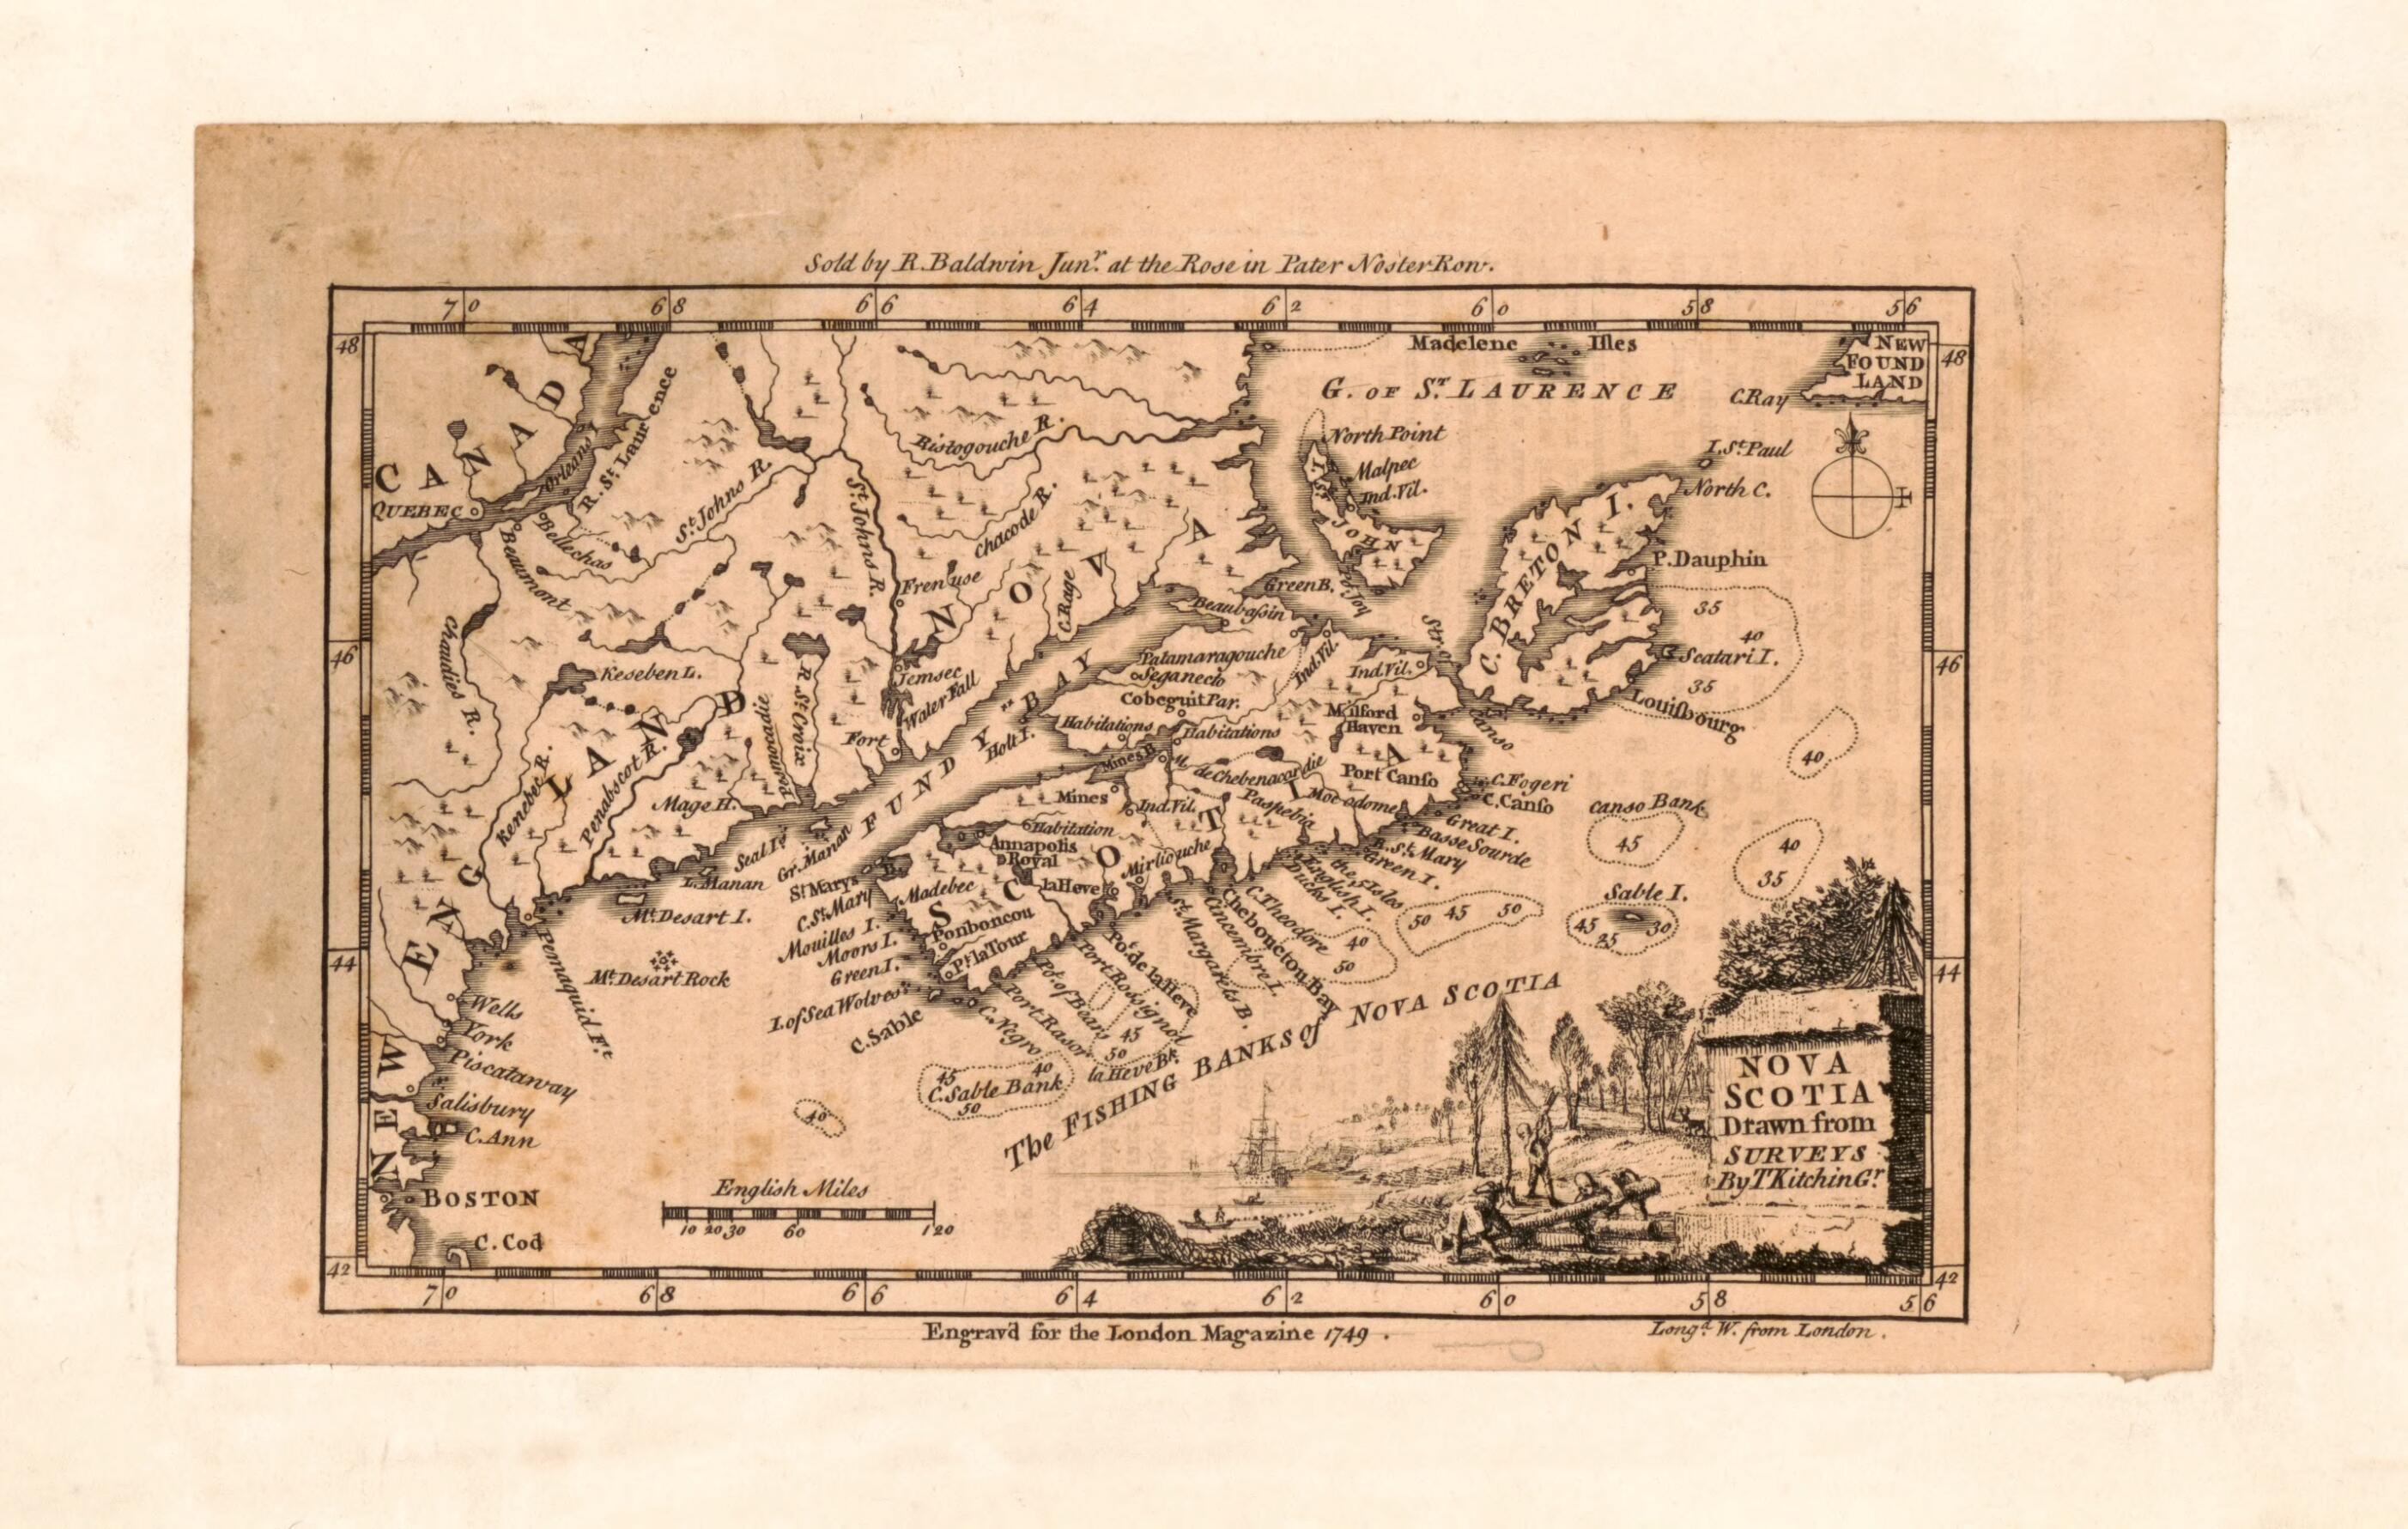 This old map of Nova Scotia from 1749 was created by Thomas Kitchin in 1749